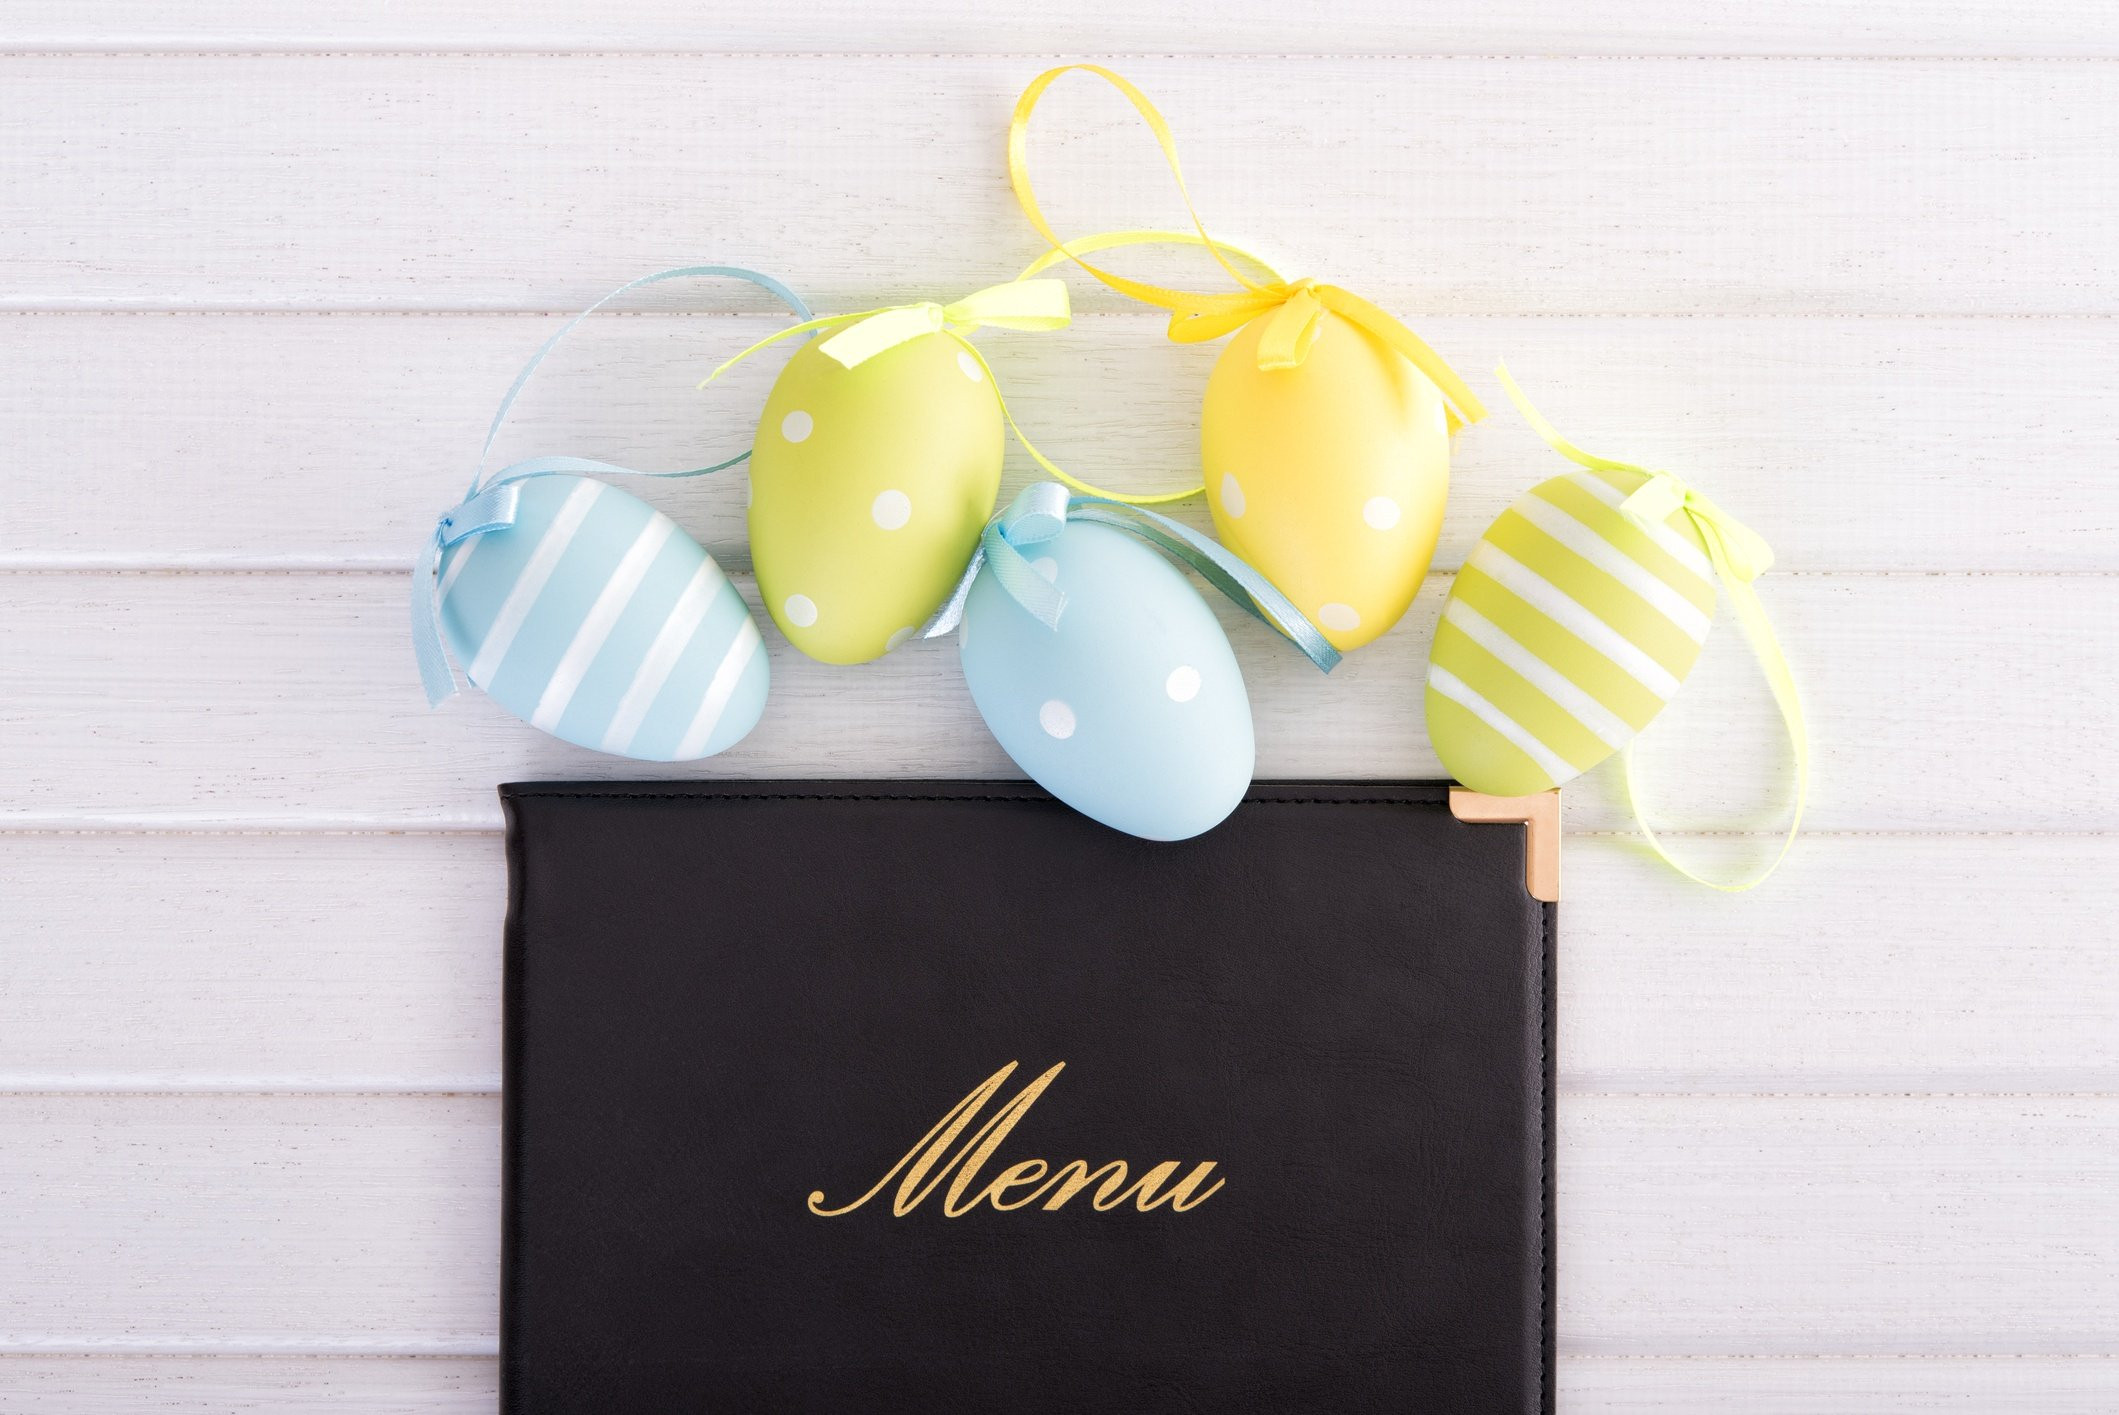 Easter Marketing Ideas
 14 Creative Easter Marketing Ideas For Your Restaurant